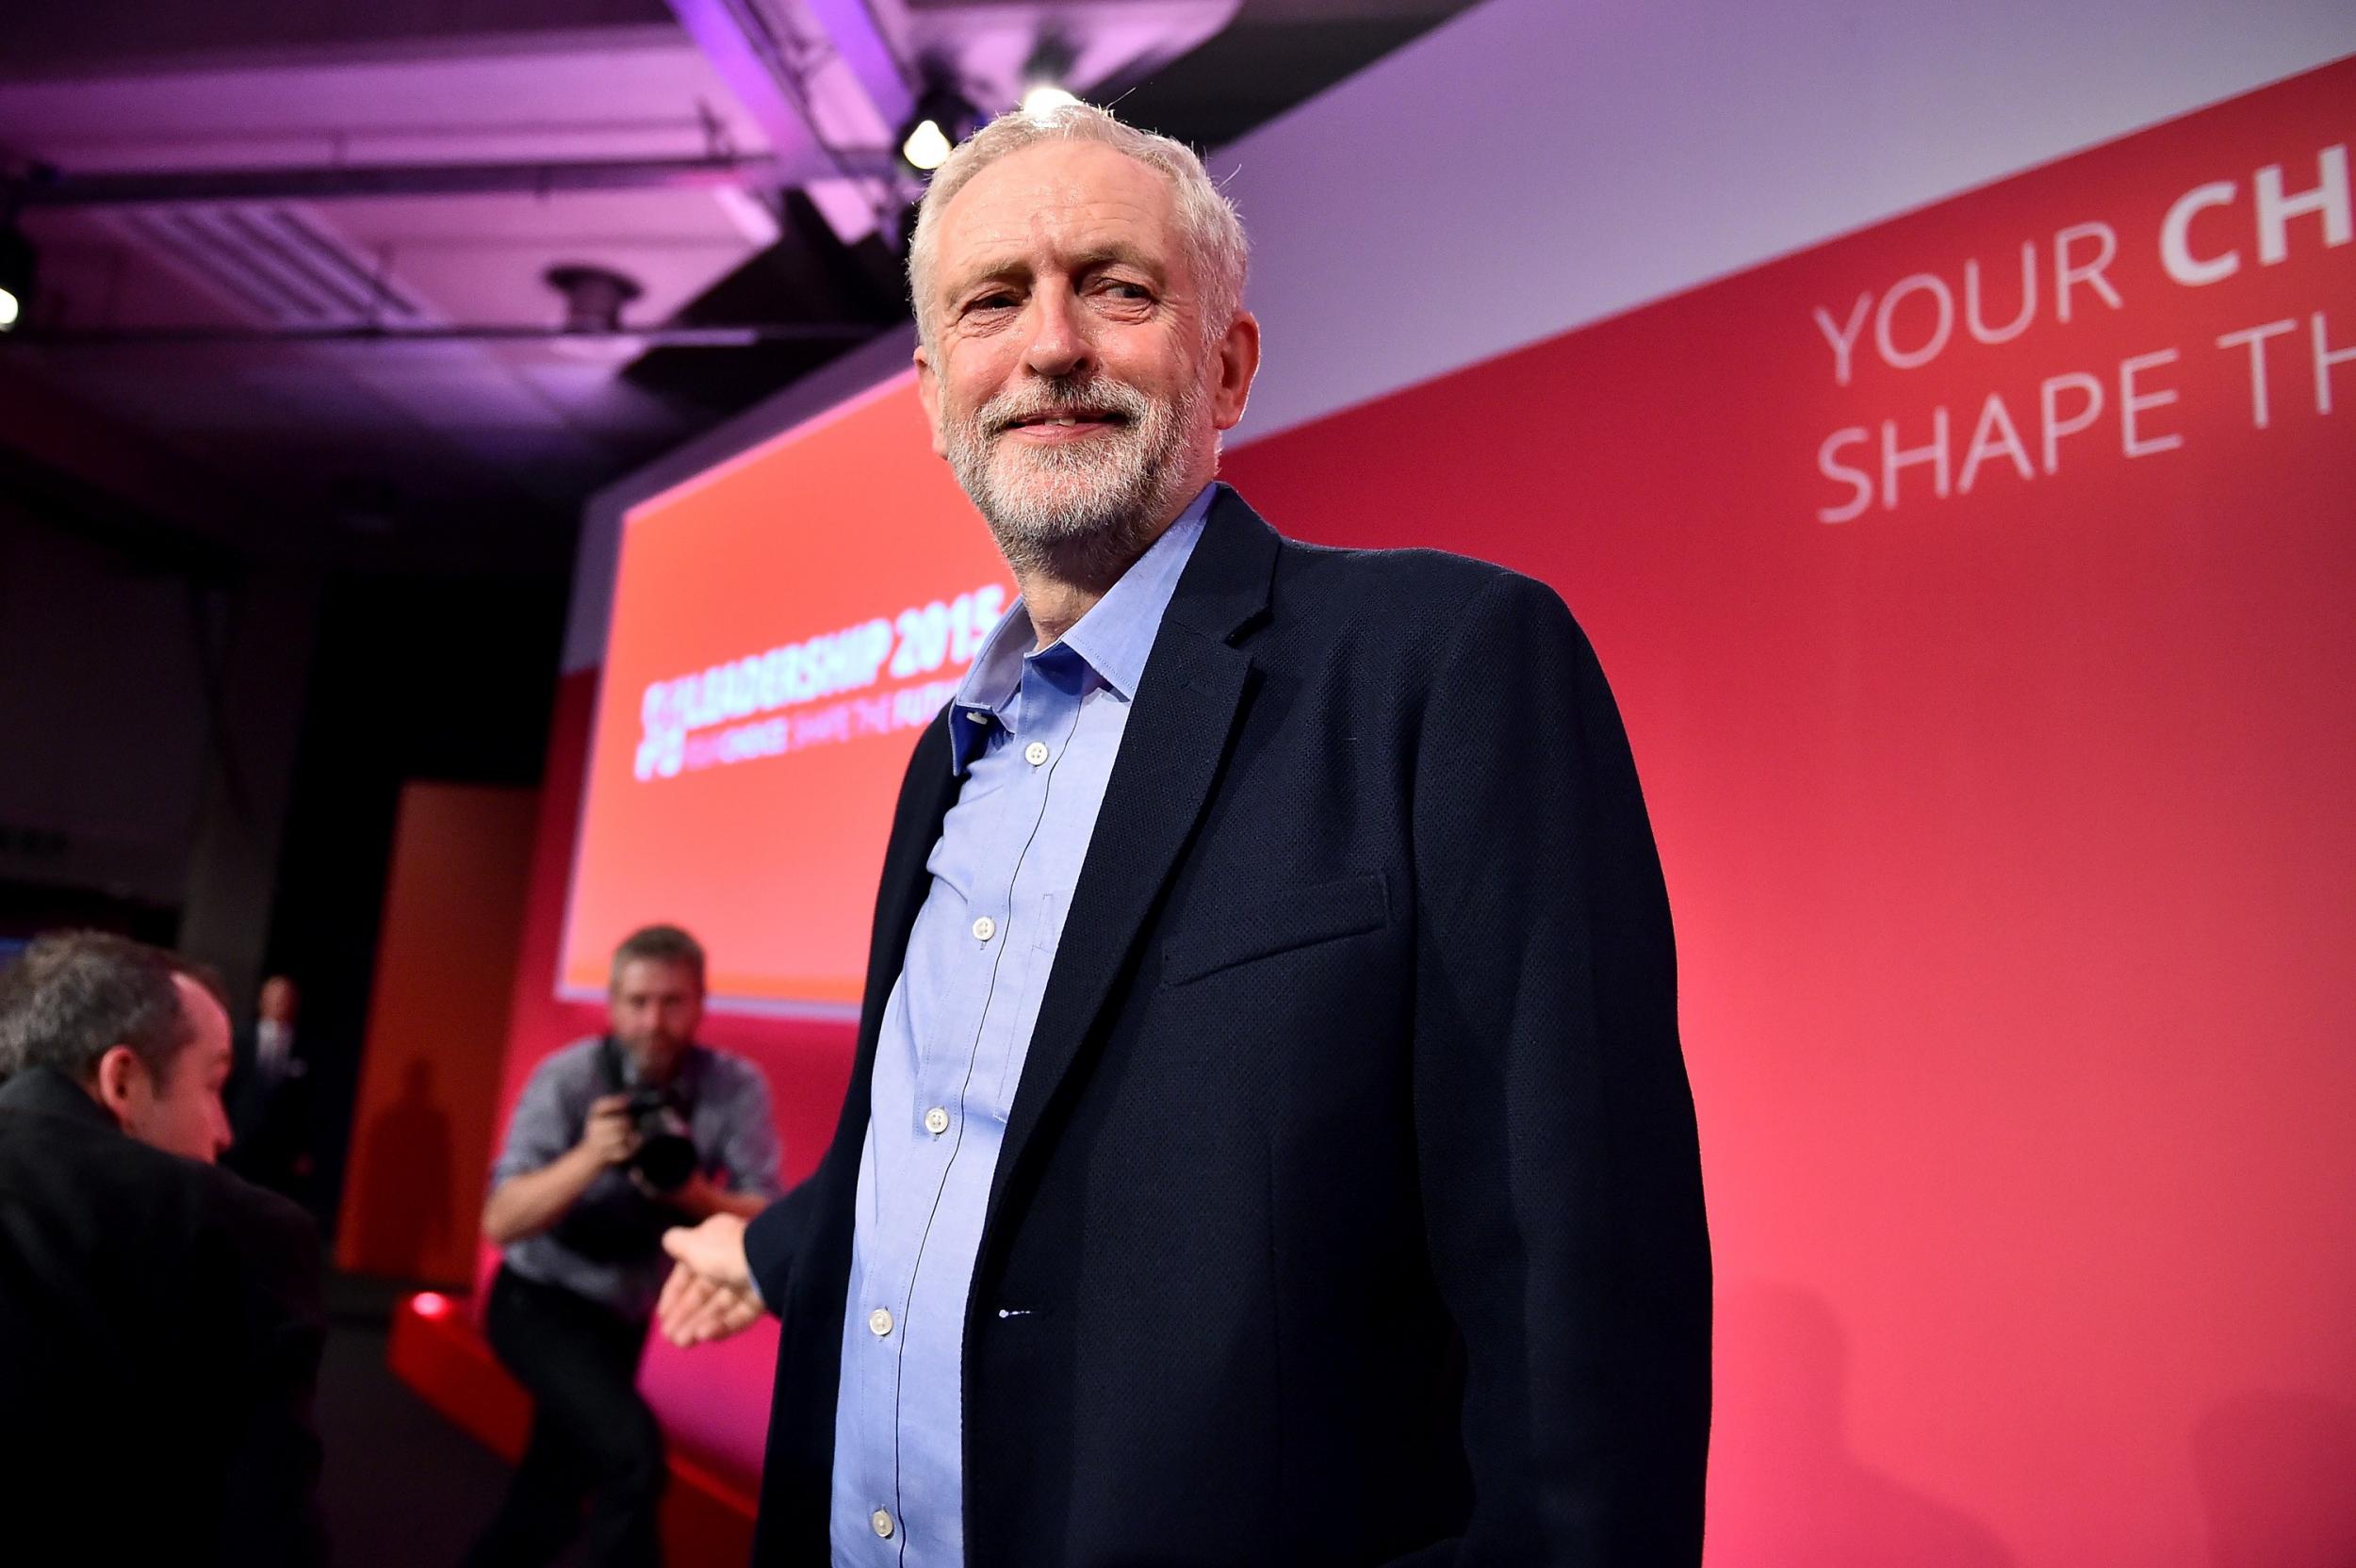 Jeremy Corbyn is announced as the new leader of the Labour Party at the Queen Elizabeth II conference centre on September 12, 2015